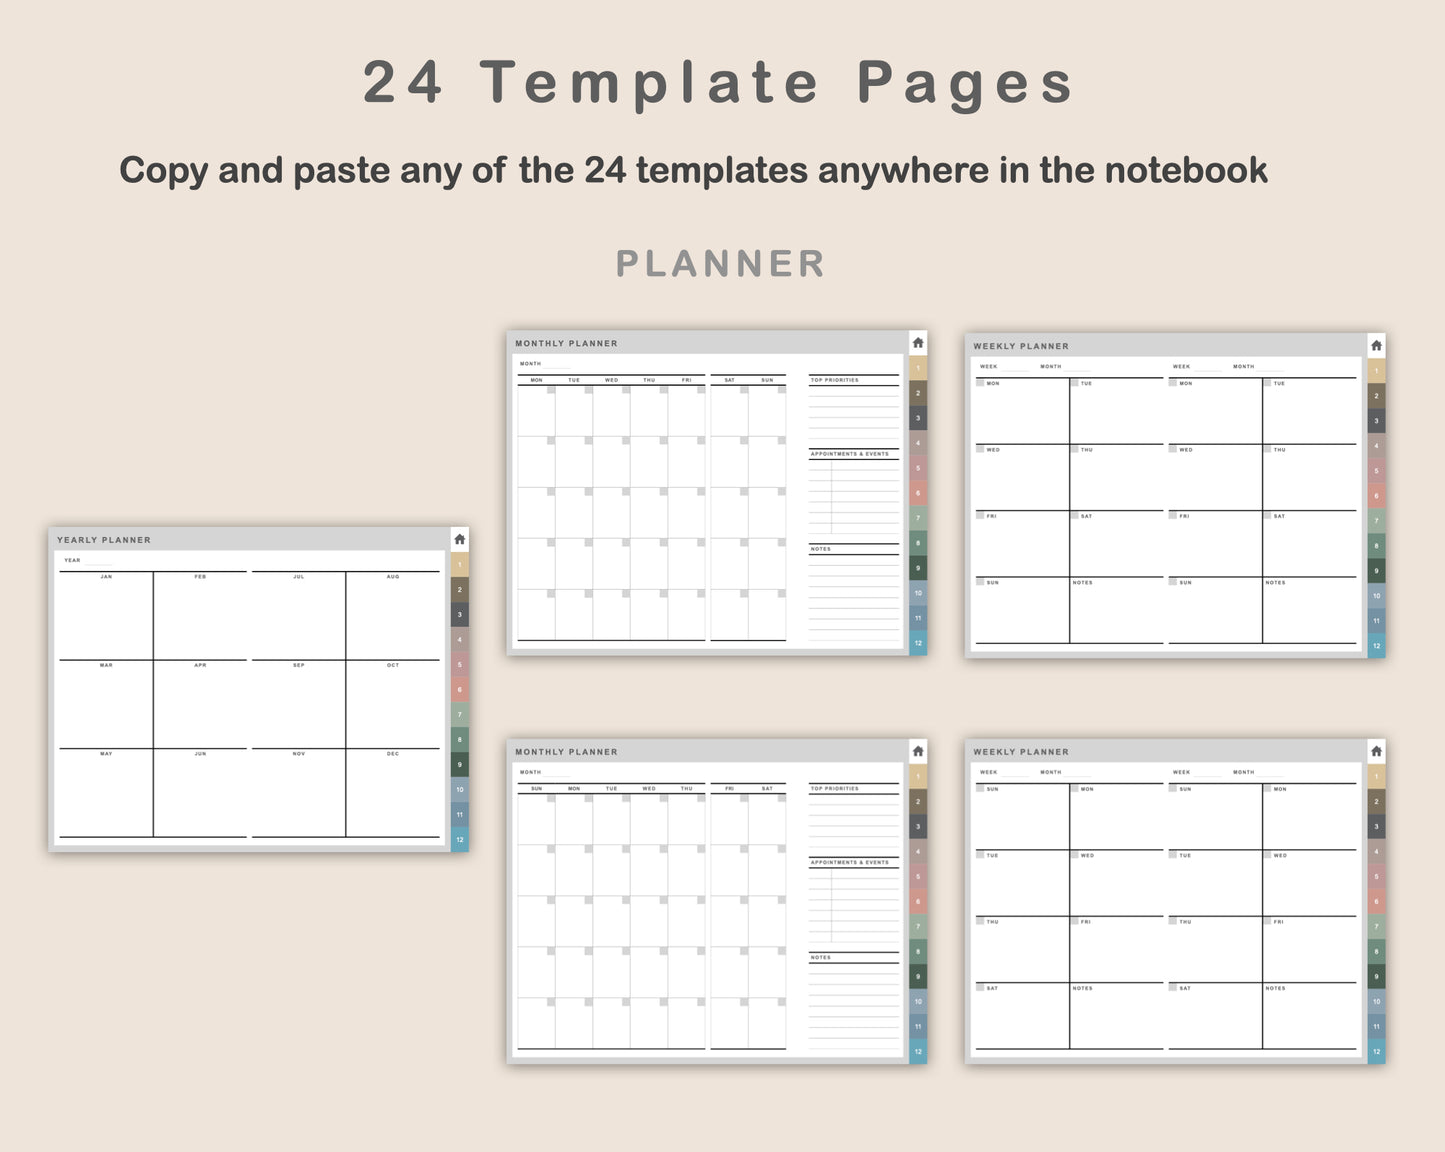 Digital Project Planner - Landscape - Muted